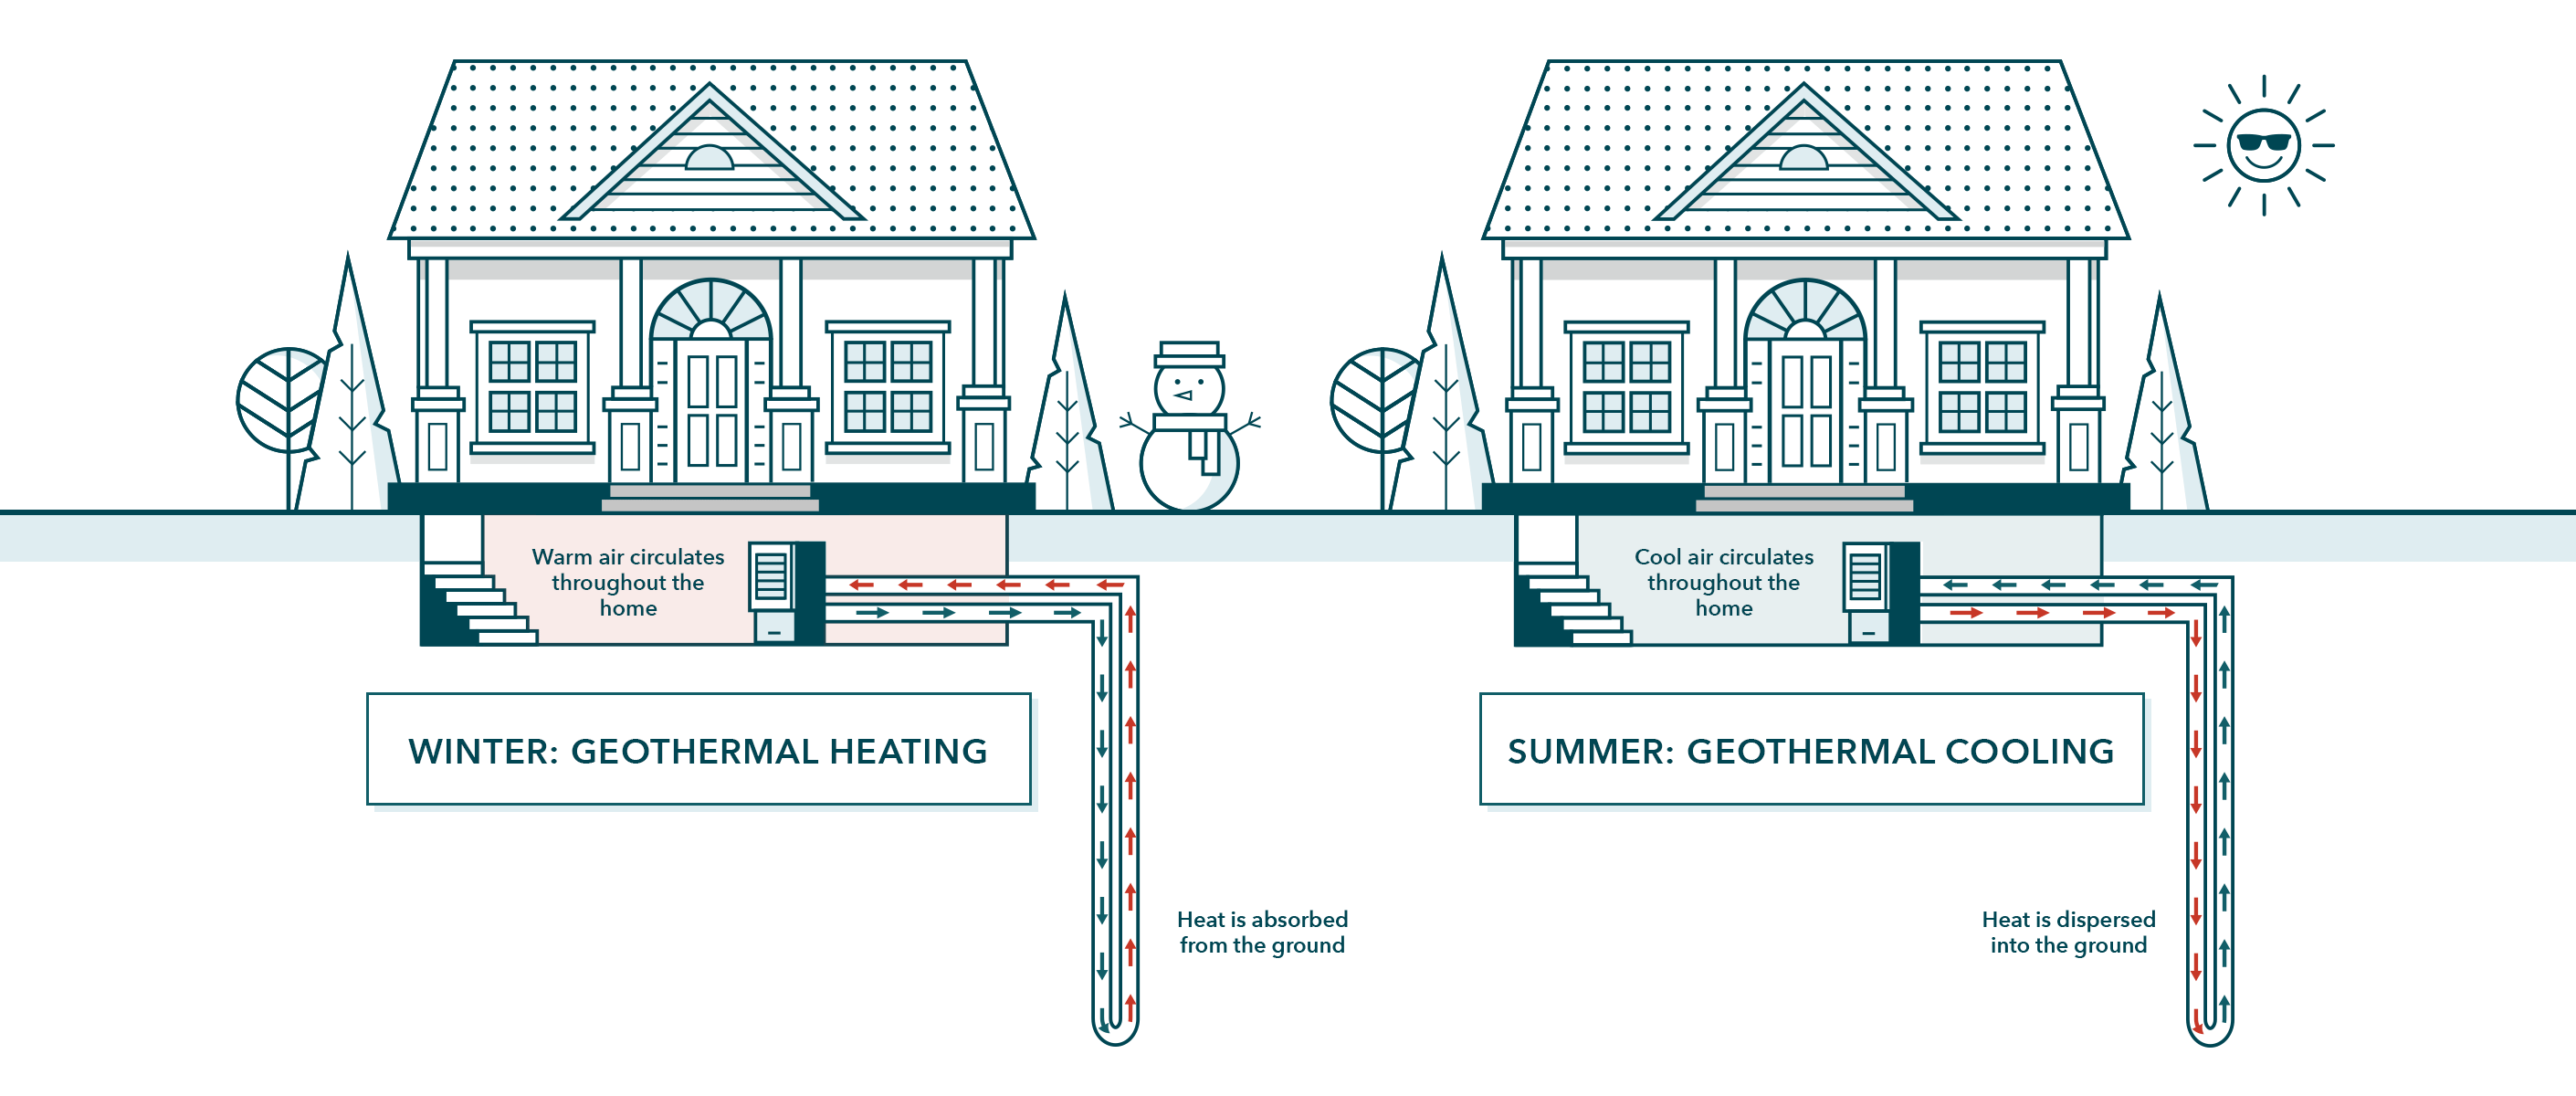 A diagram showing how ground-source heat pumps (GSHP) heat and cool buildings.